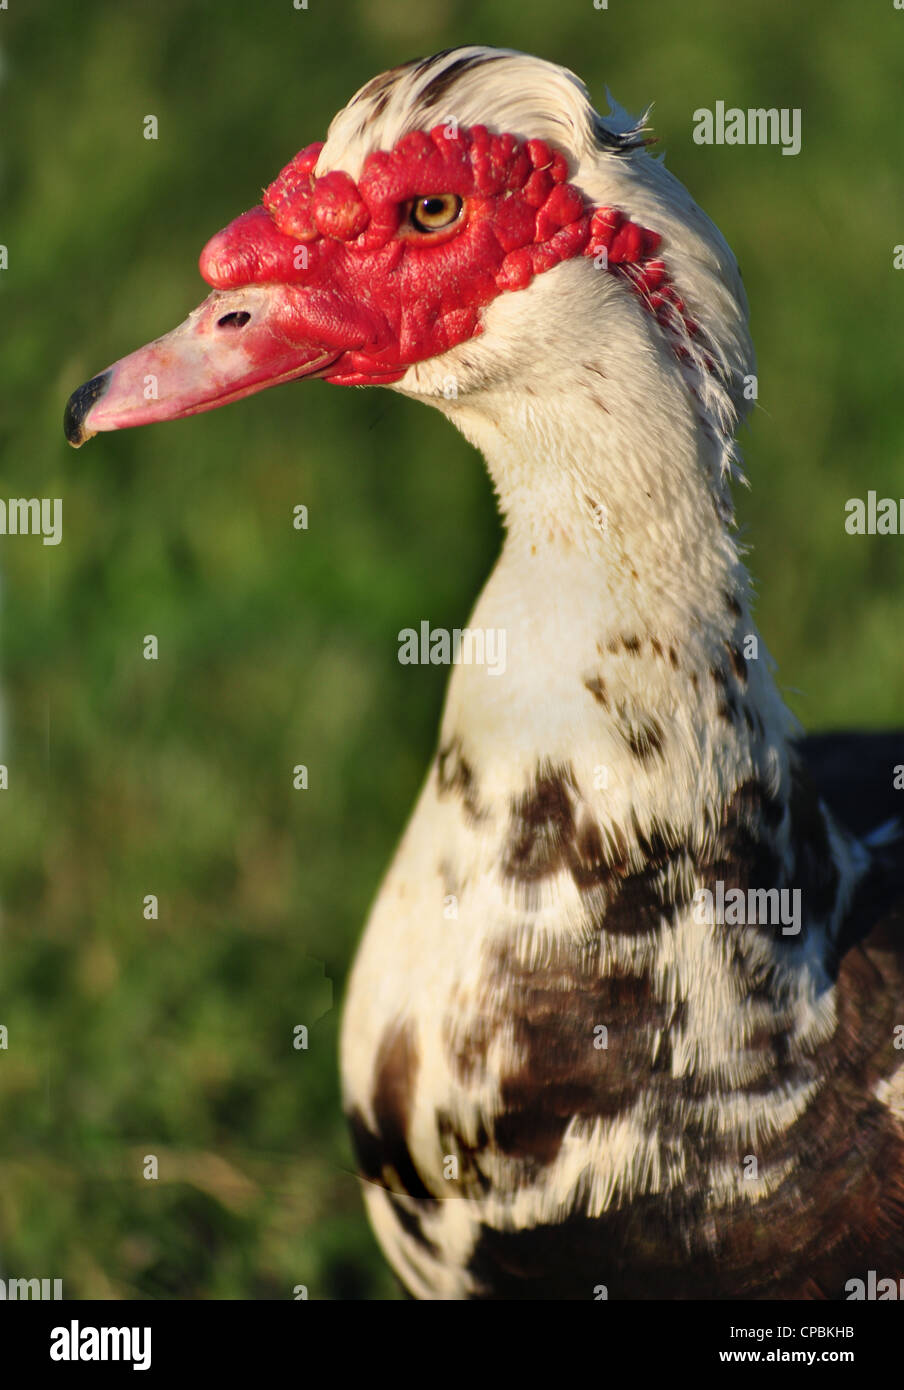 side portrait of red headed duck Stock Photo